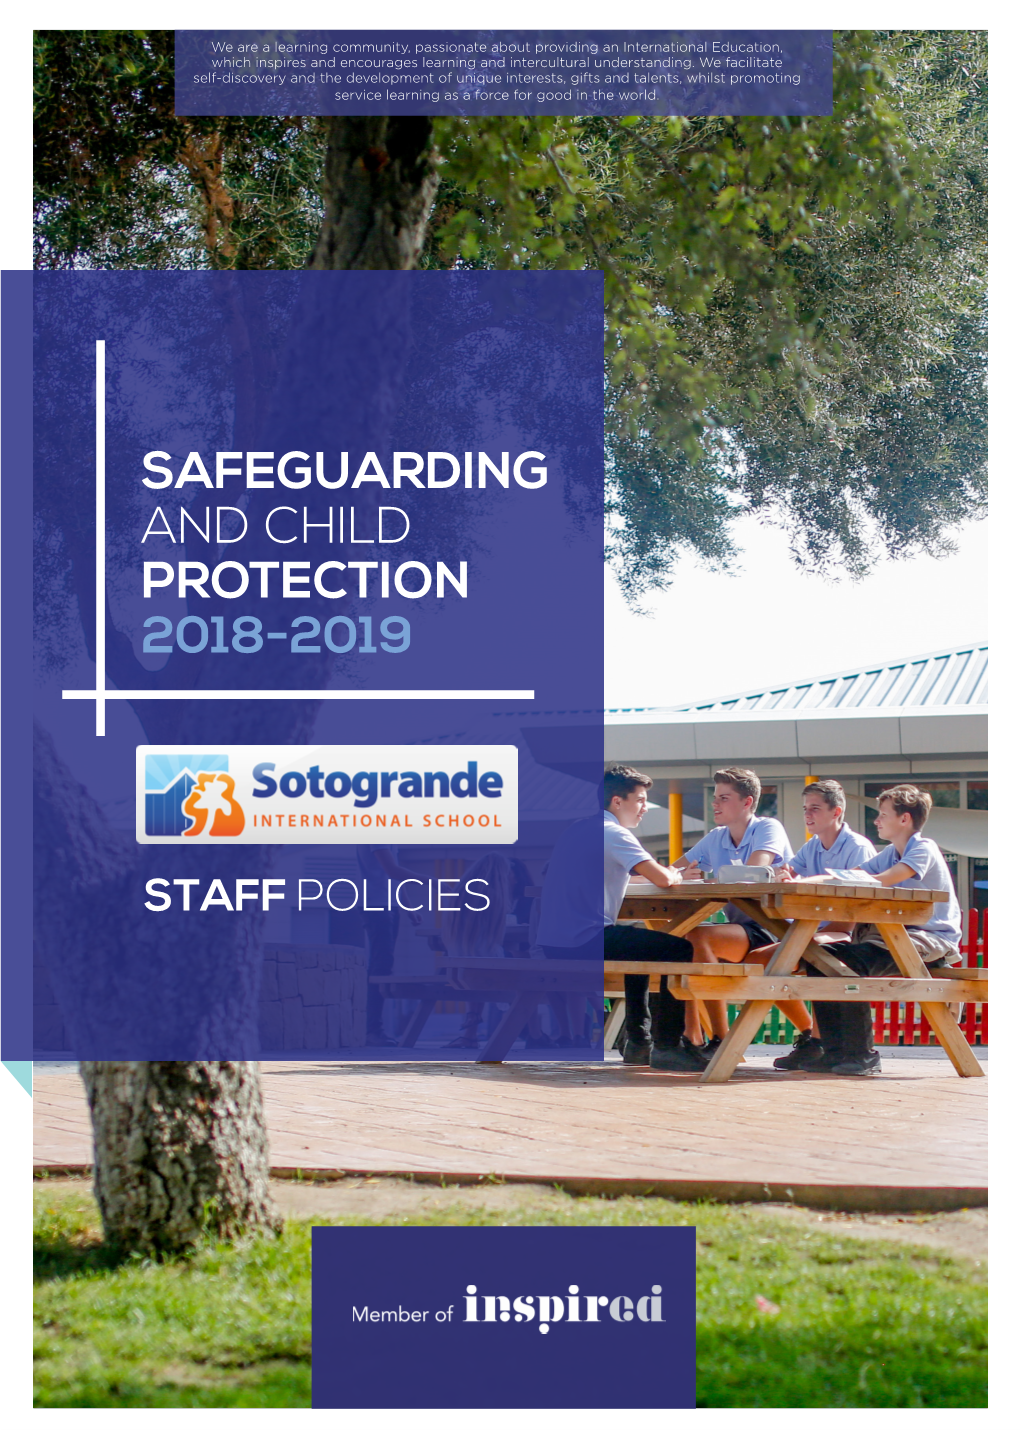 Safeguarding and Child Protection 2018-2019